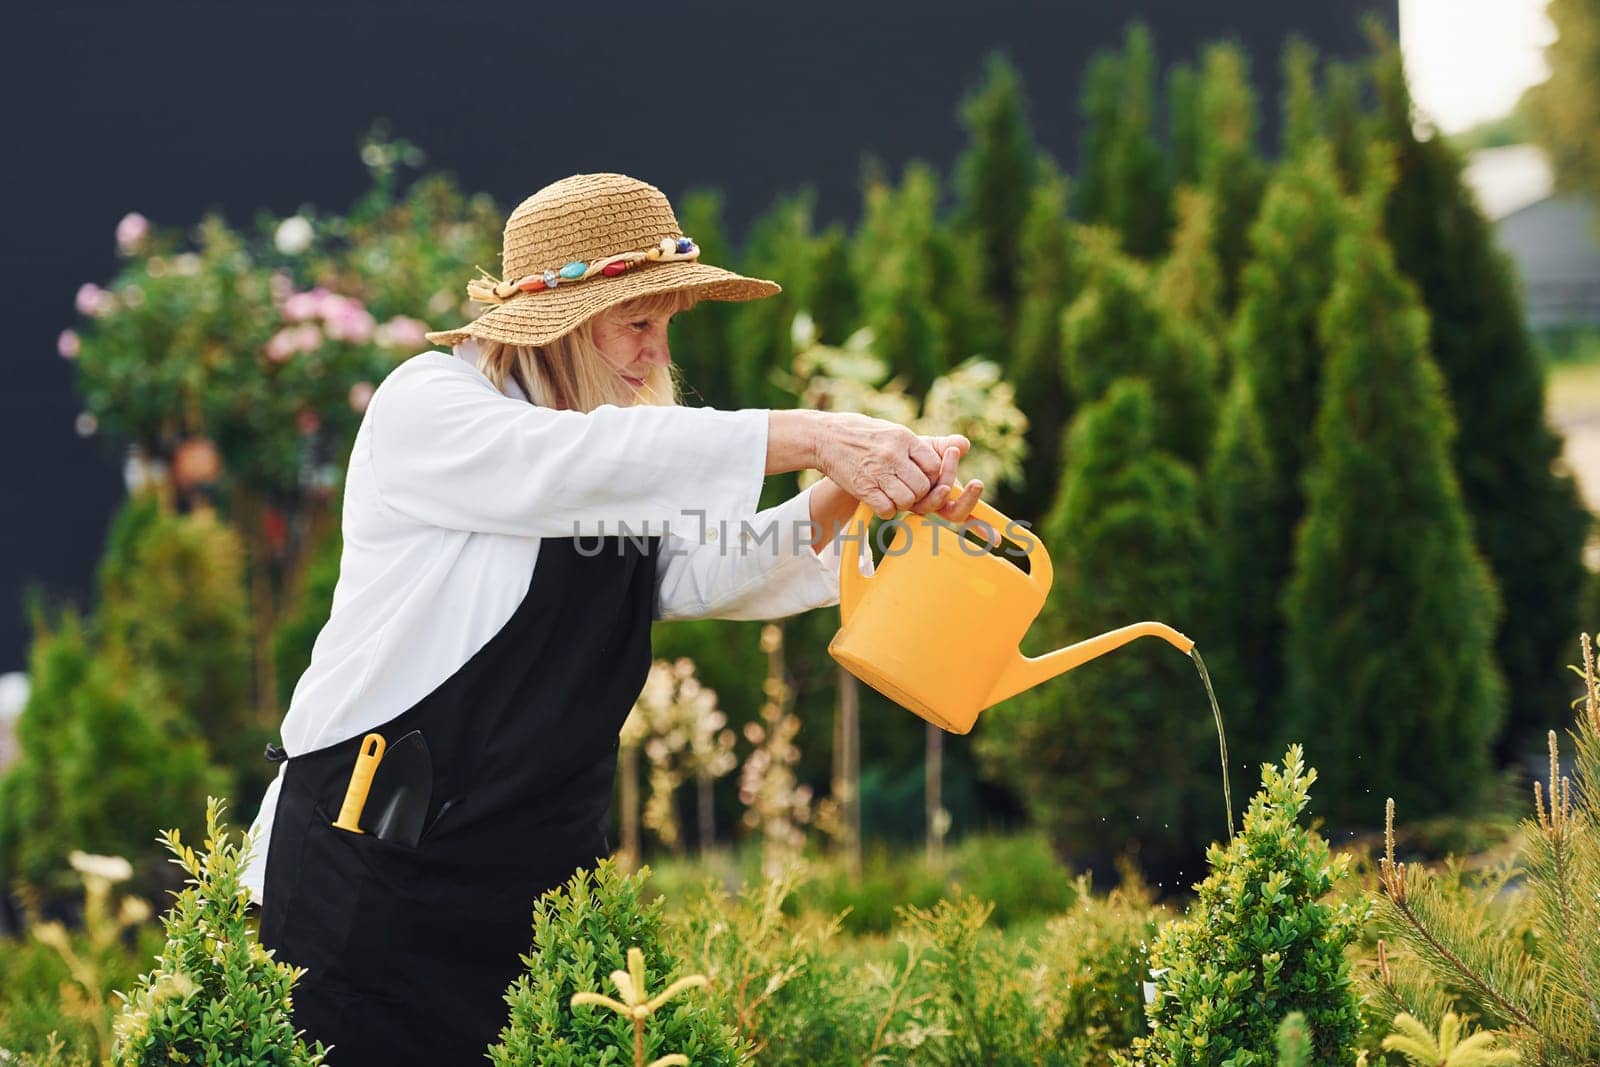 Using yellow colored watering can. Senior woman is in the garden at daytime. Conception of plants and seasons by Standret